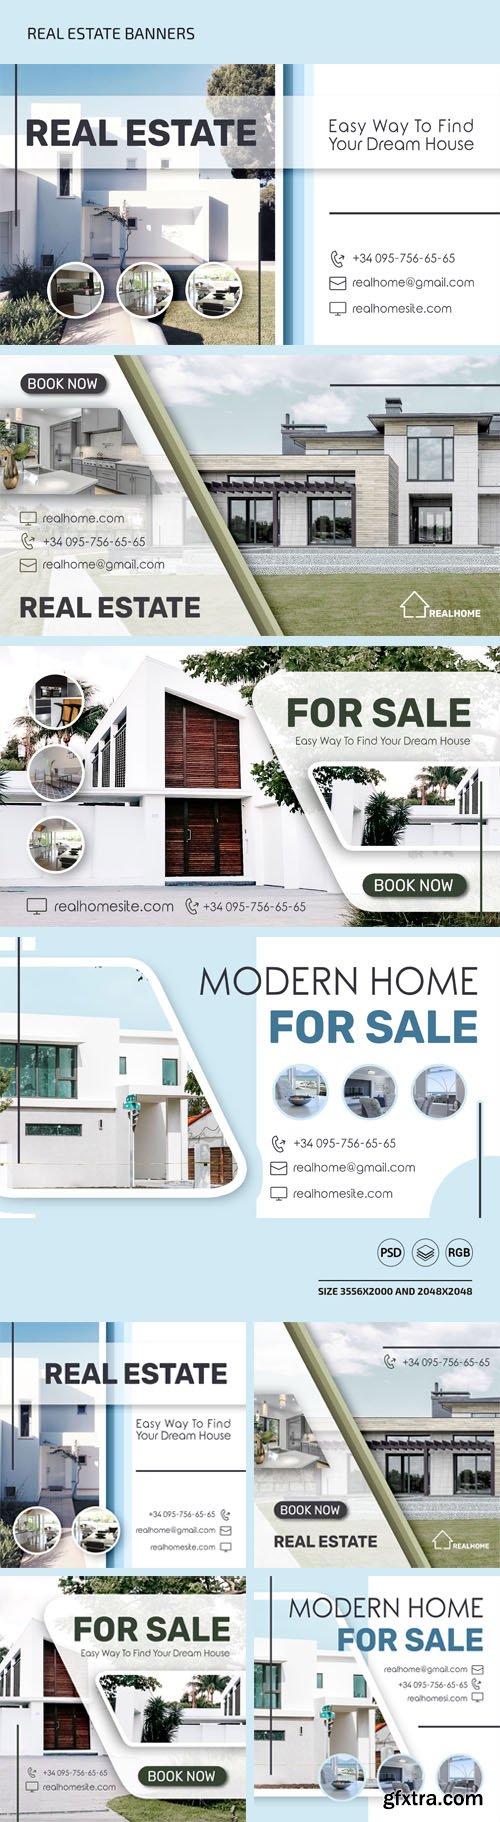 Real Estate Banners PSD Templates for Facebook & Instagram